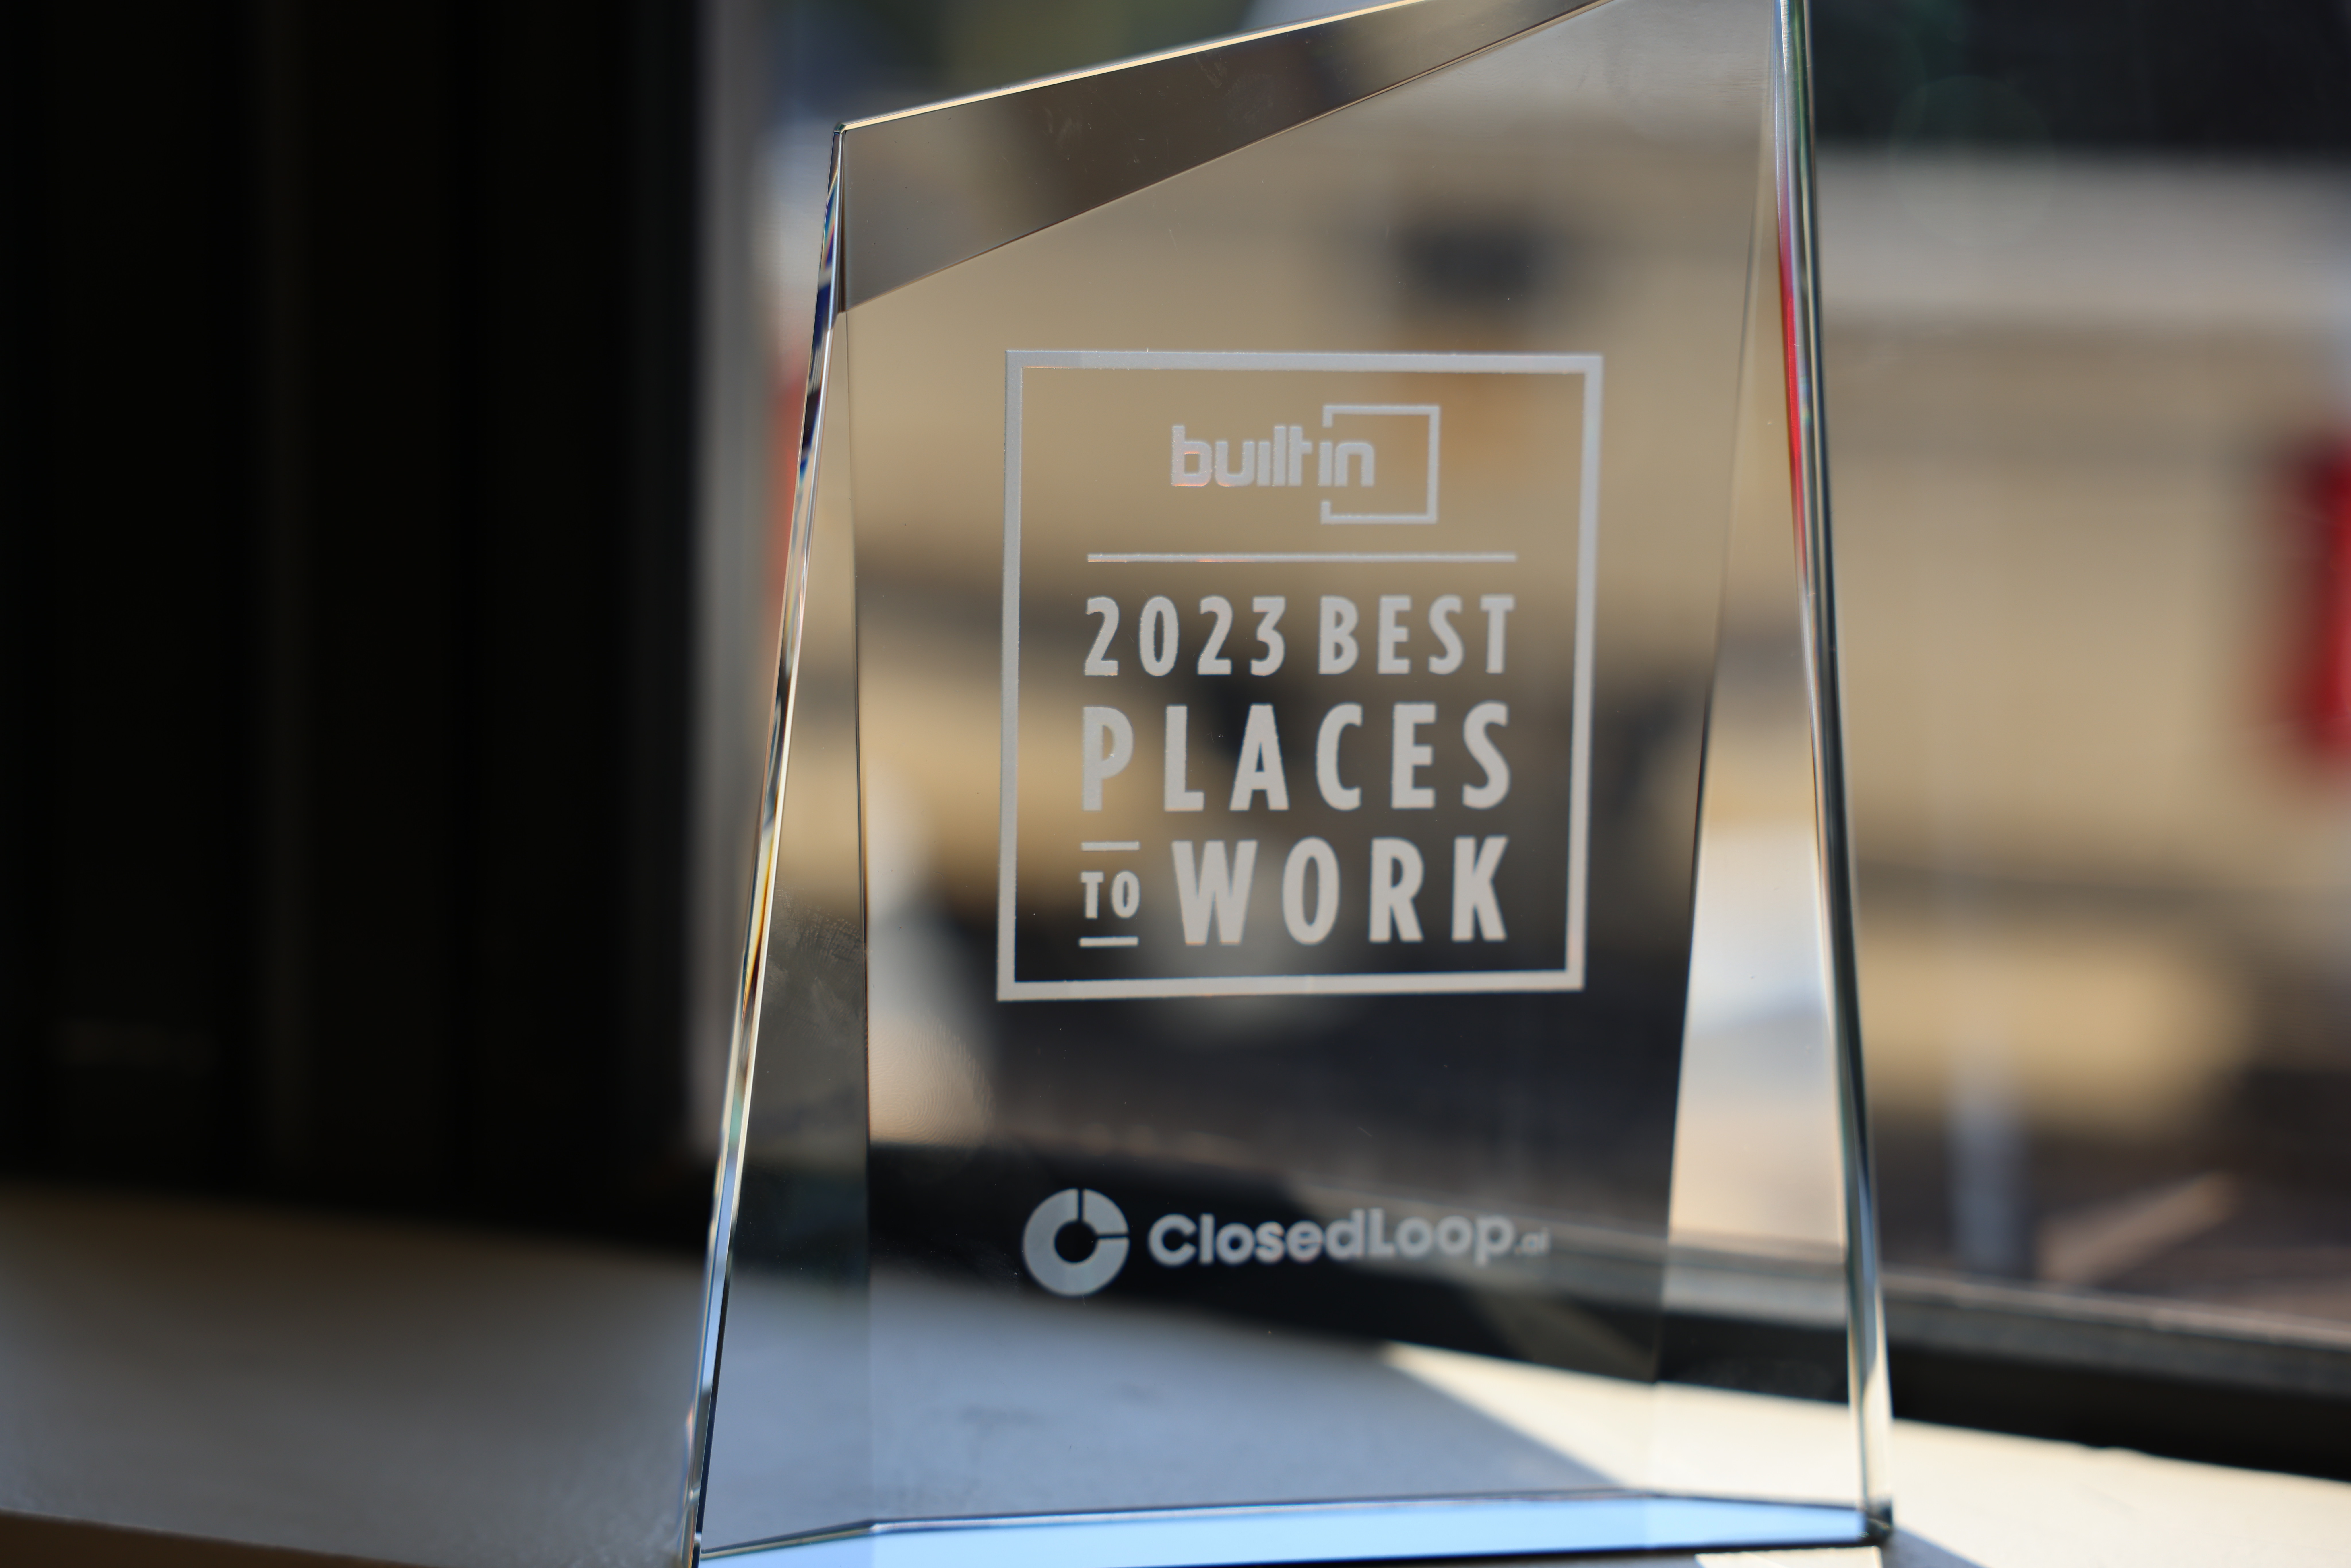 A Built In Best Places to Work 2023 award given to ClosedLoop for its outstanding workplace culture